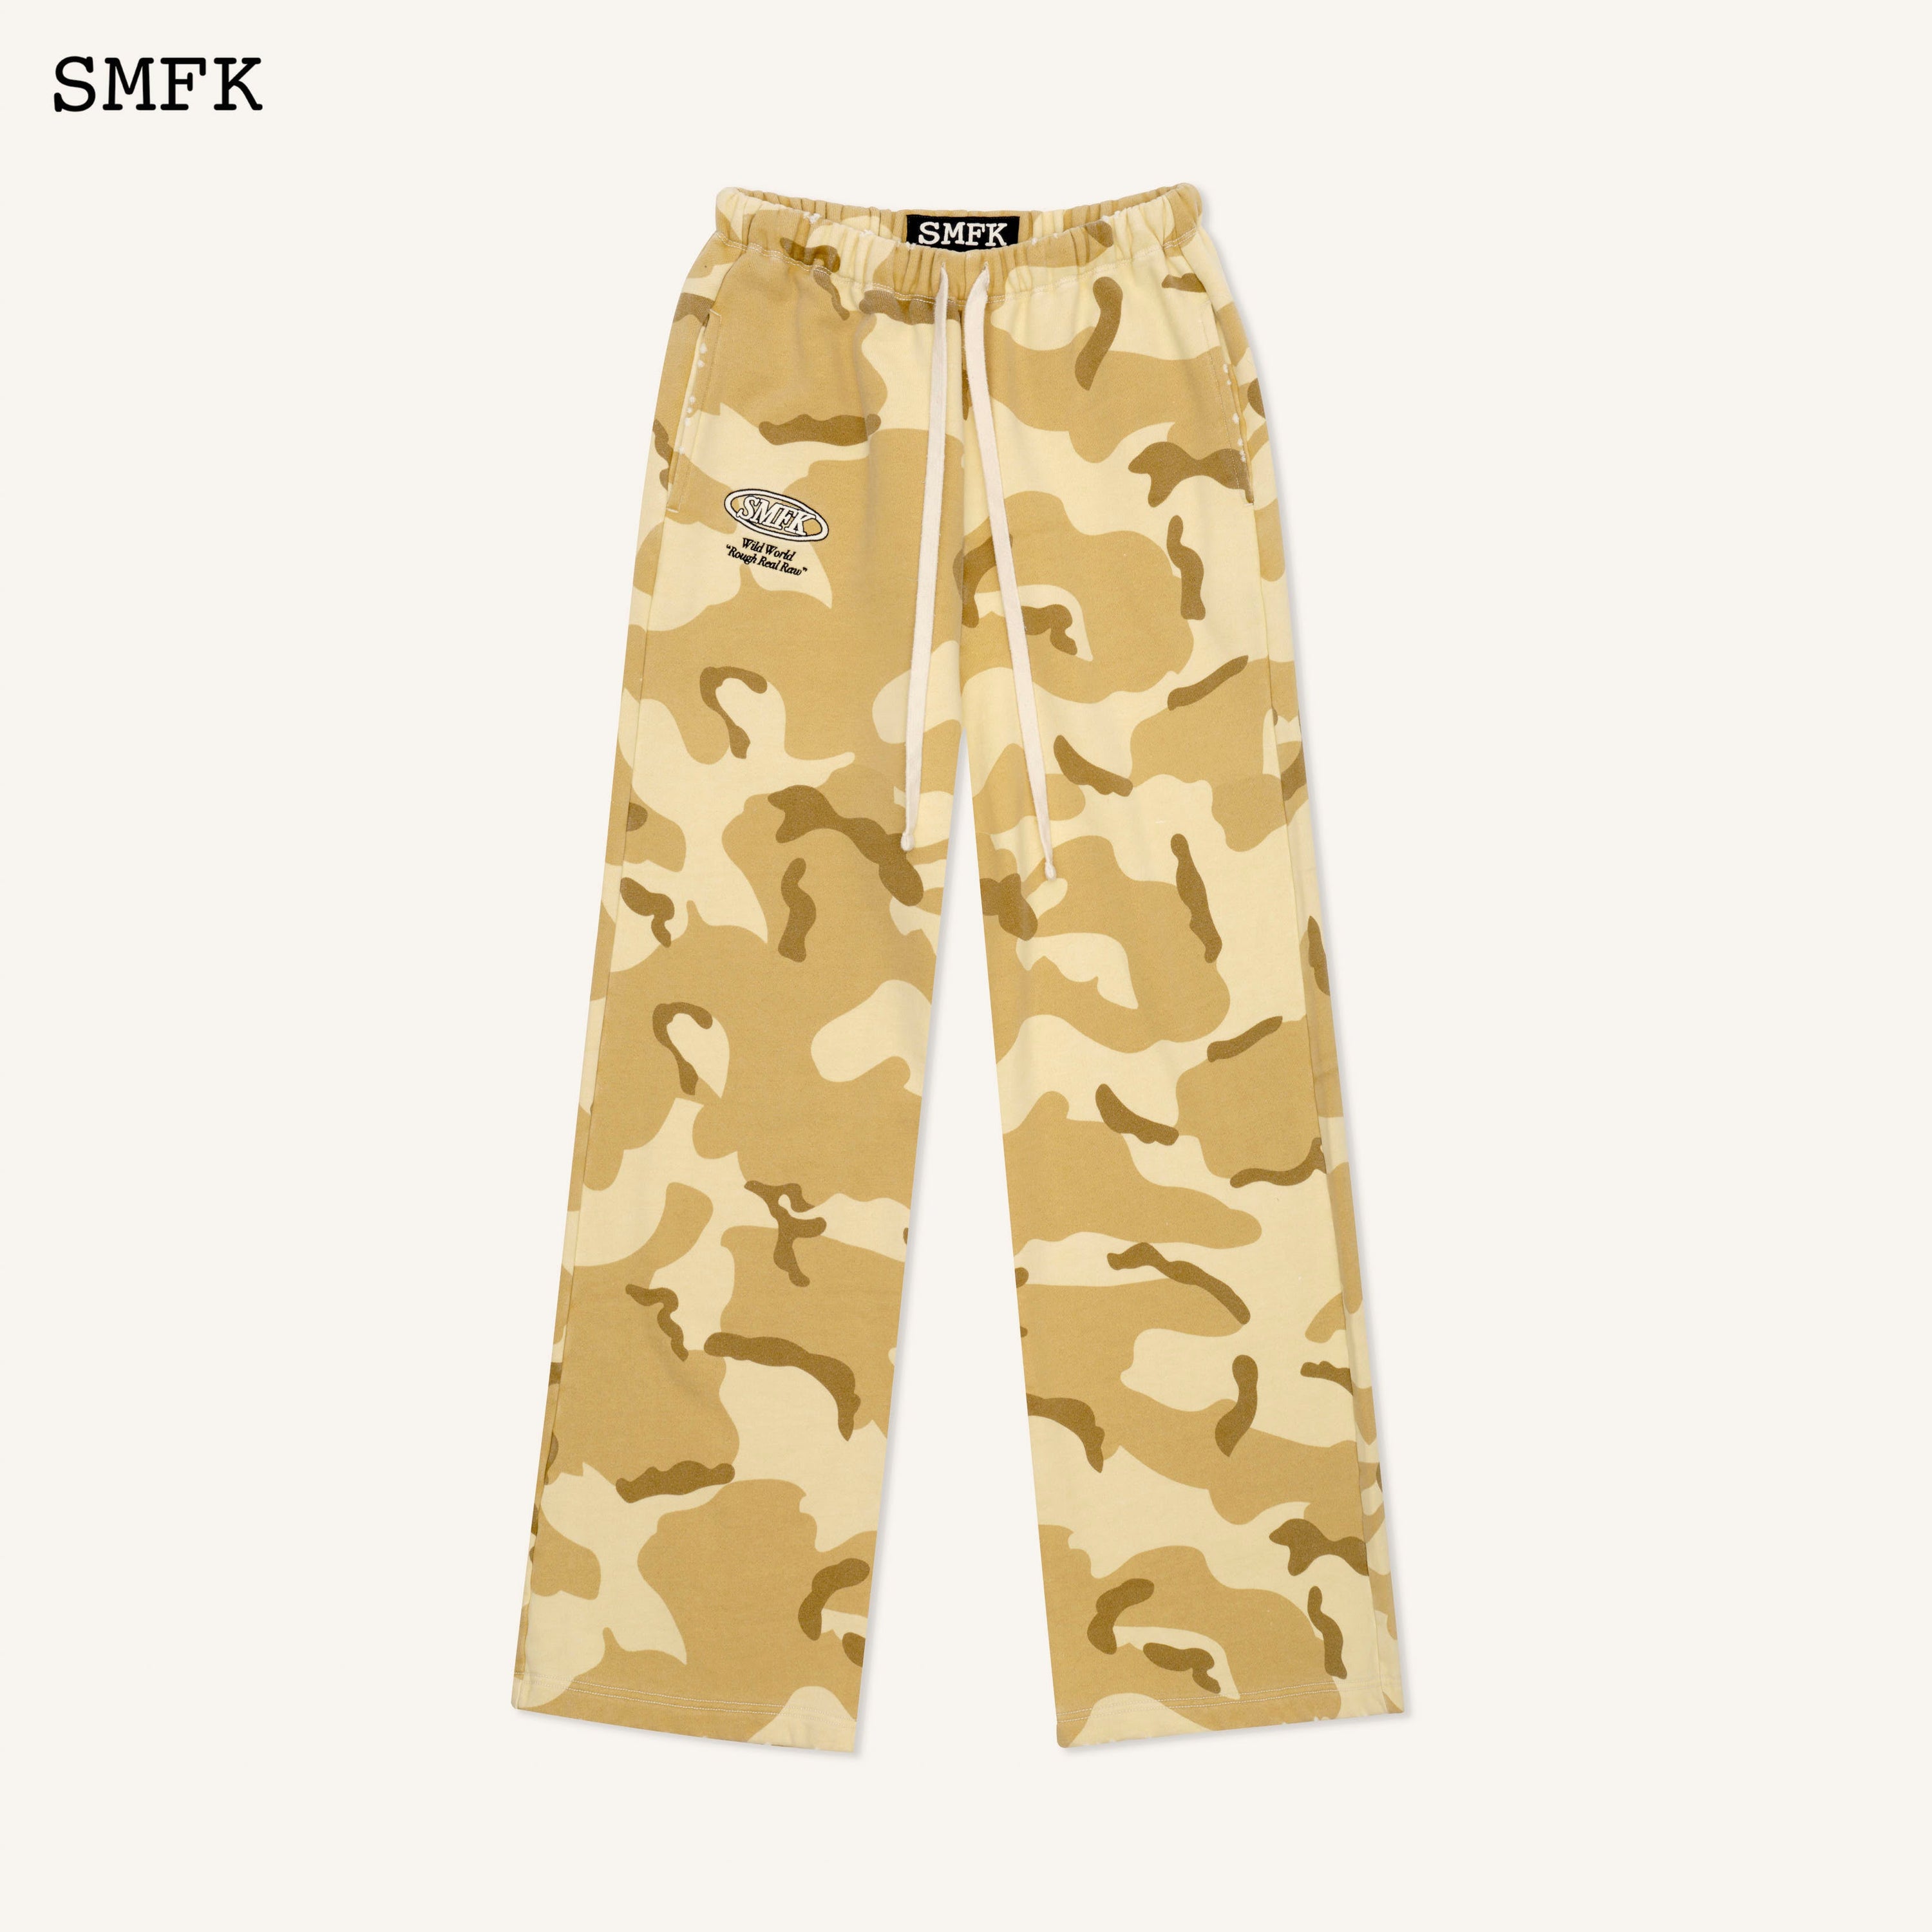 WildWorld Desert Camouflage Sweatpants Culottes - SMFK Official